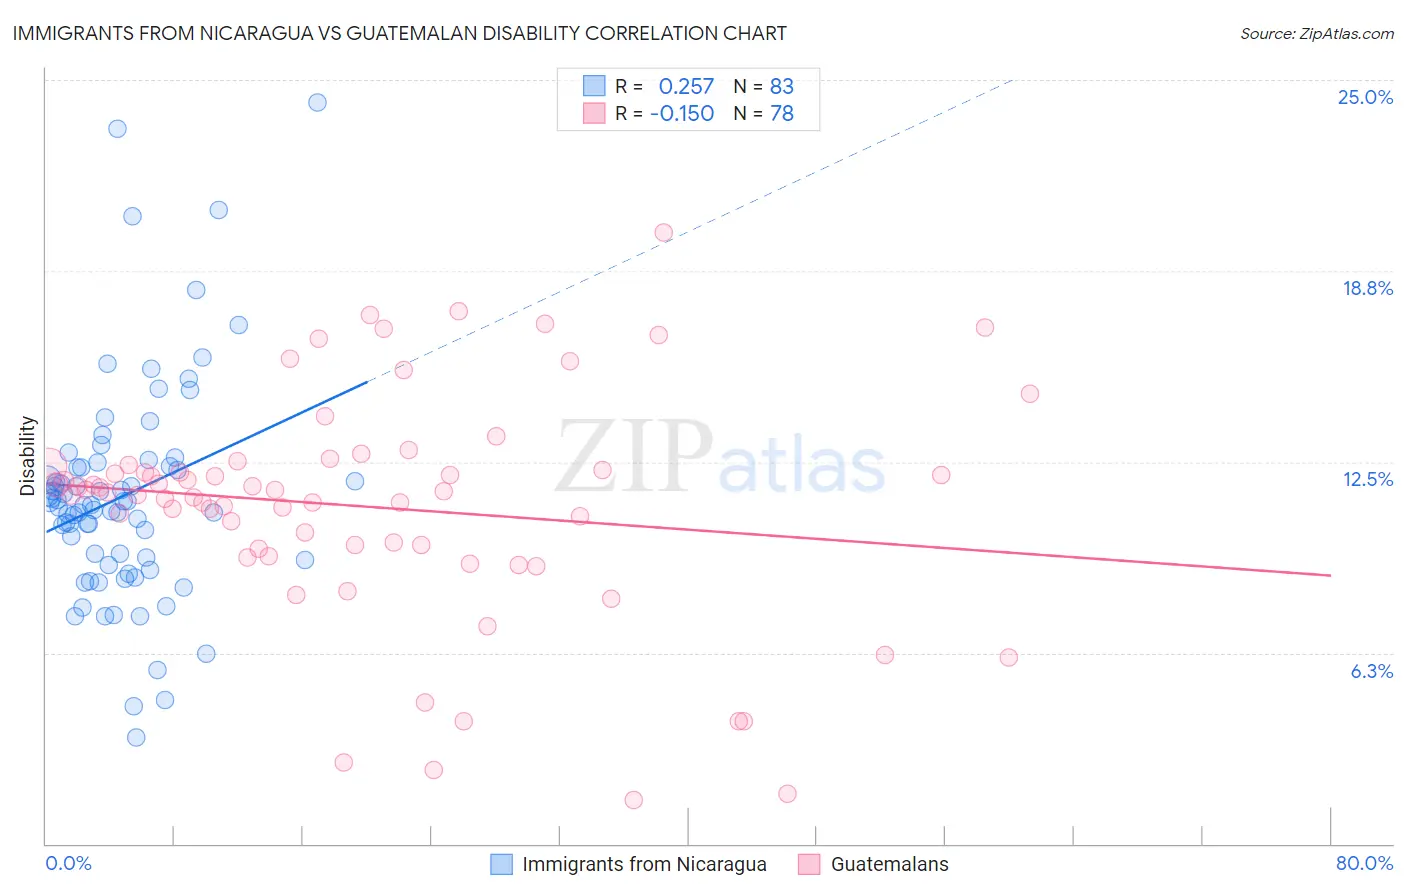 Immigrants from Nicaragua vs Guatemalan Disability